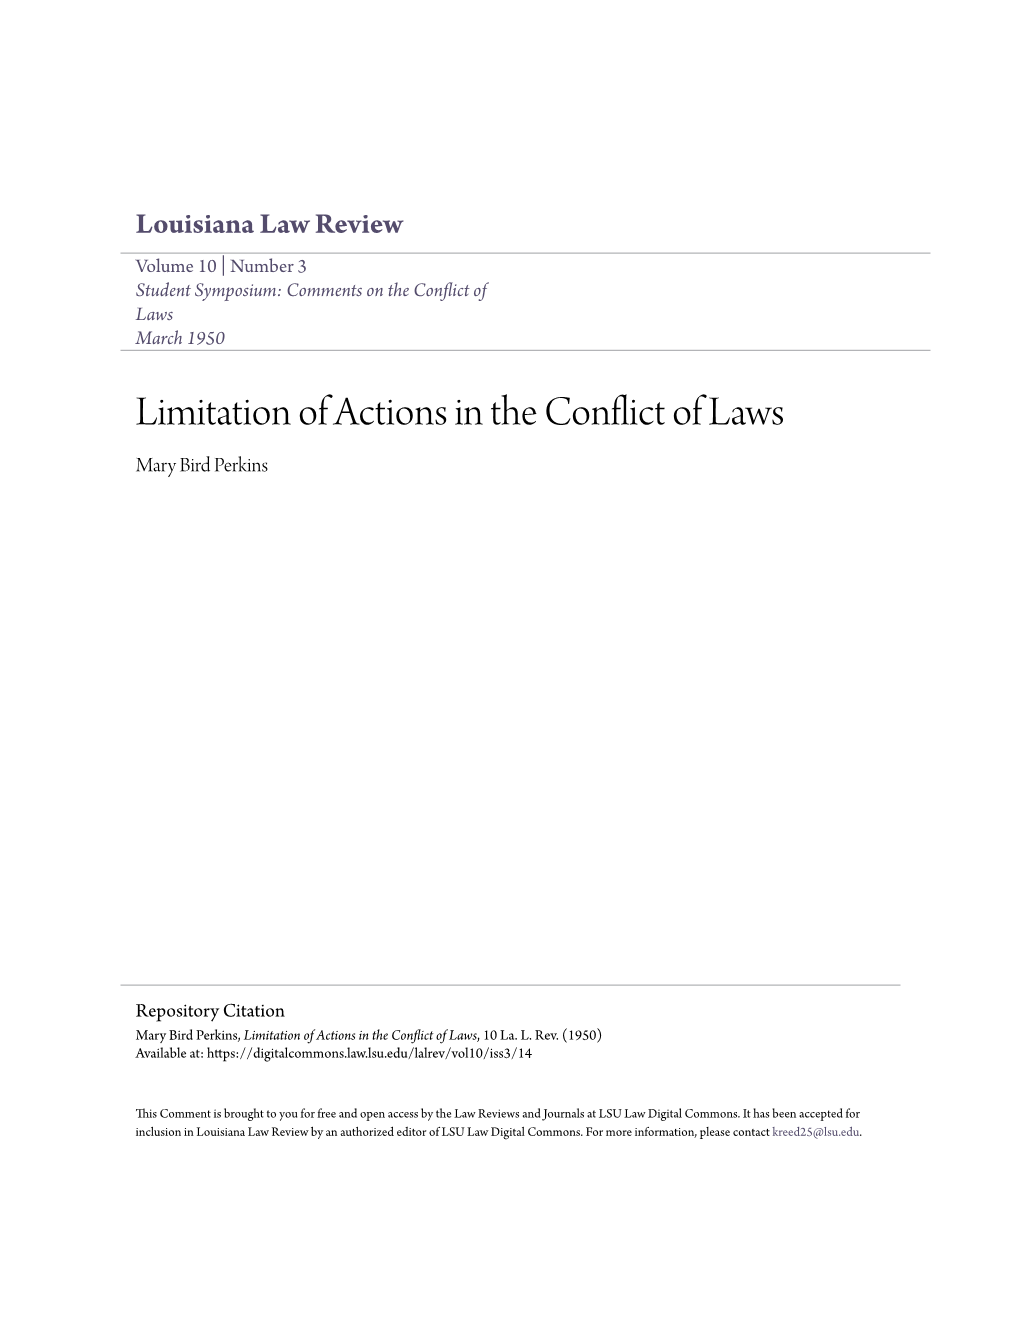 Limitation of Actions in the Conflict of Laws Mary Bird Perkins